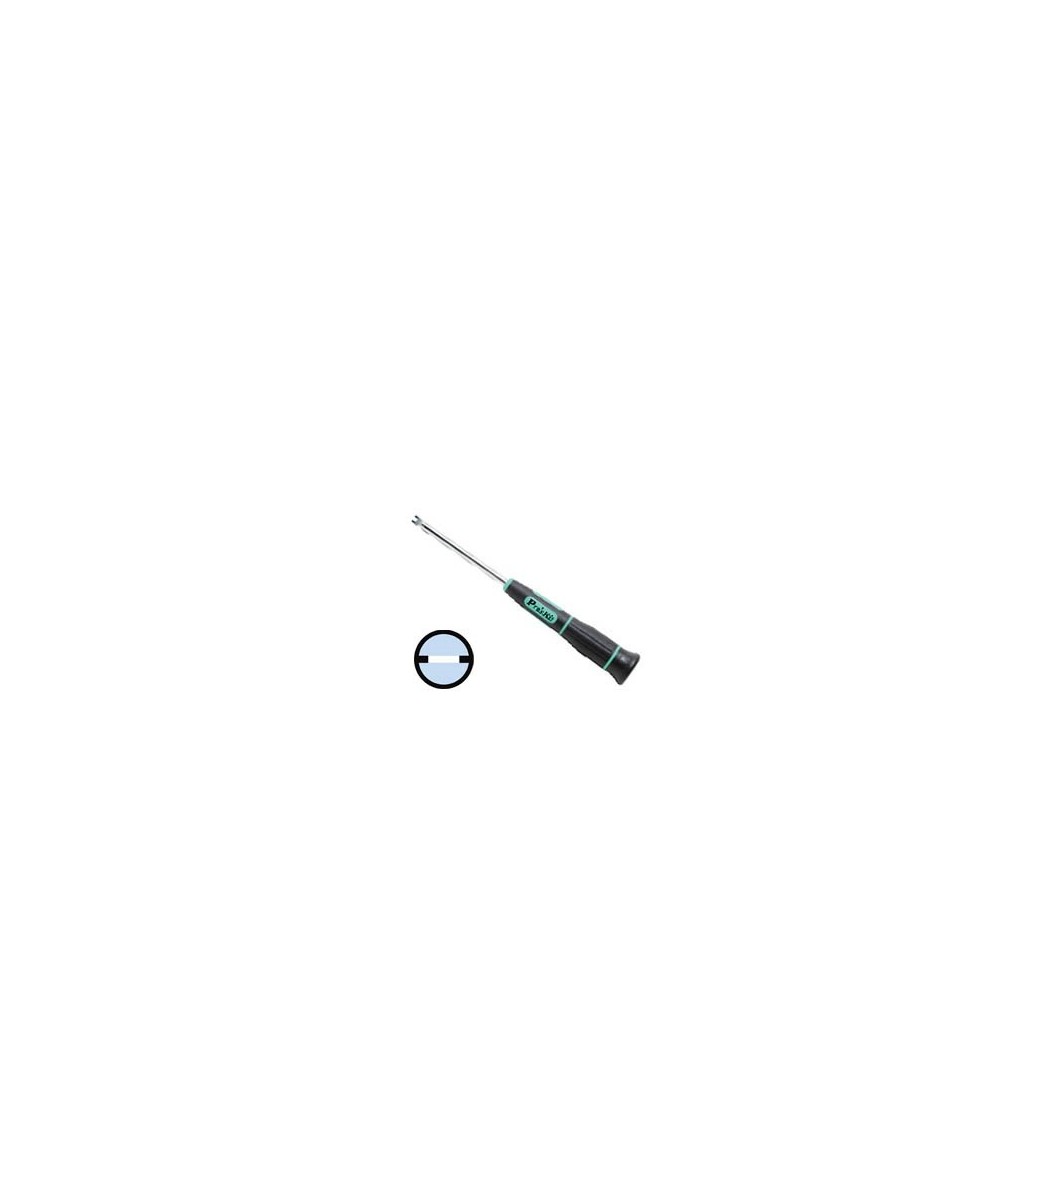 FORKED SCREWDRIVER SD-2400-S8 T/PROskit